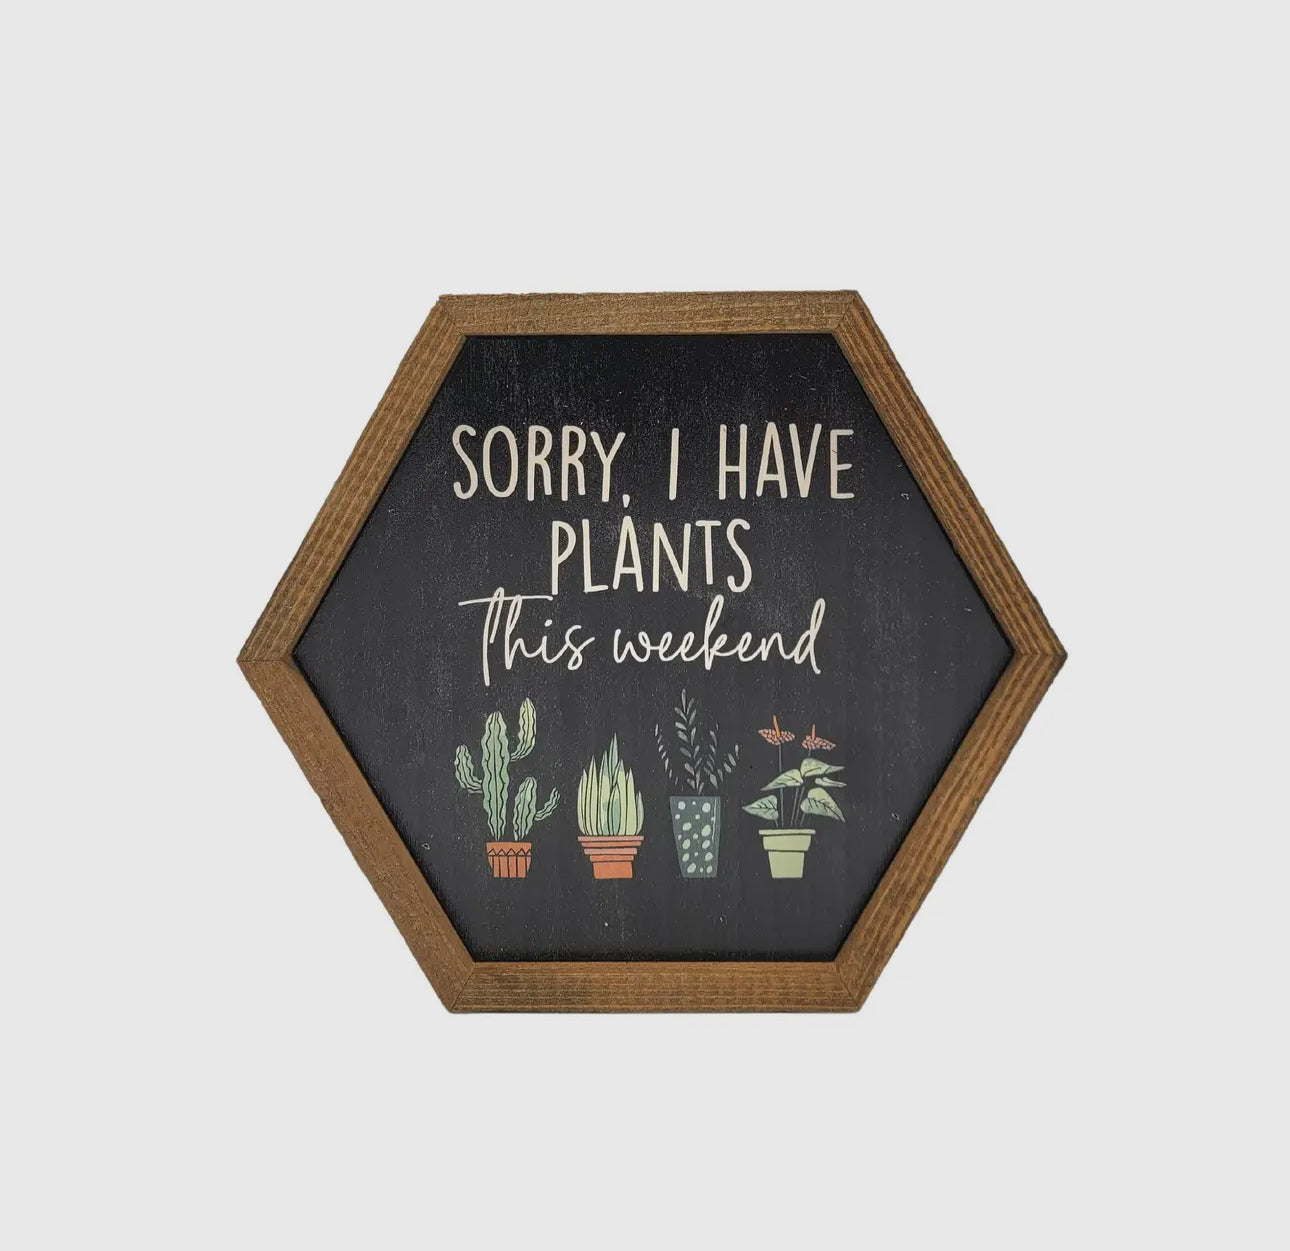 Plants this weekend hexagon sign